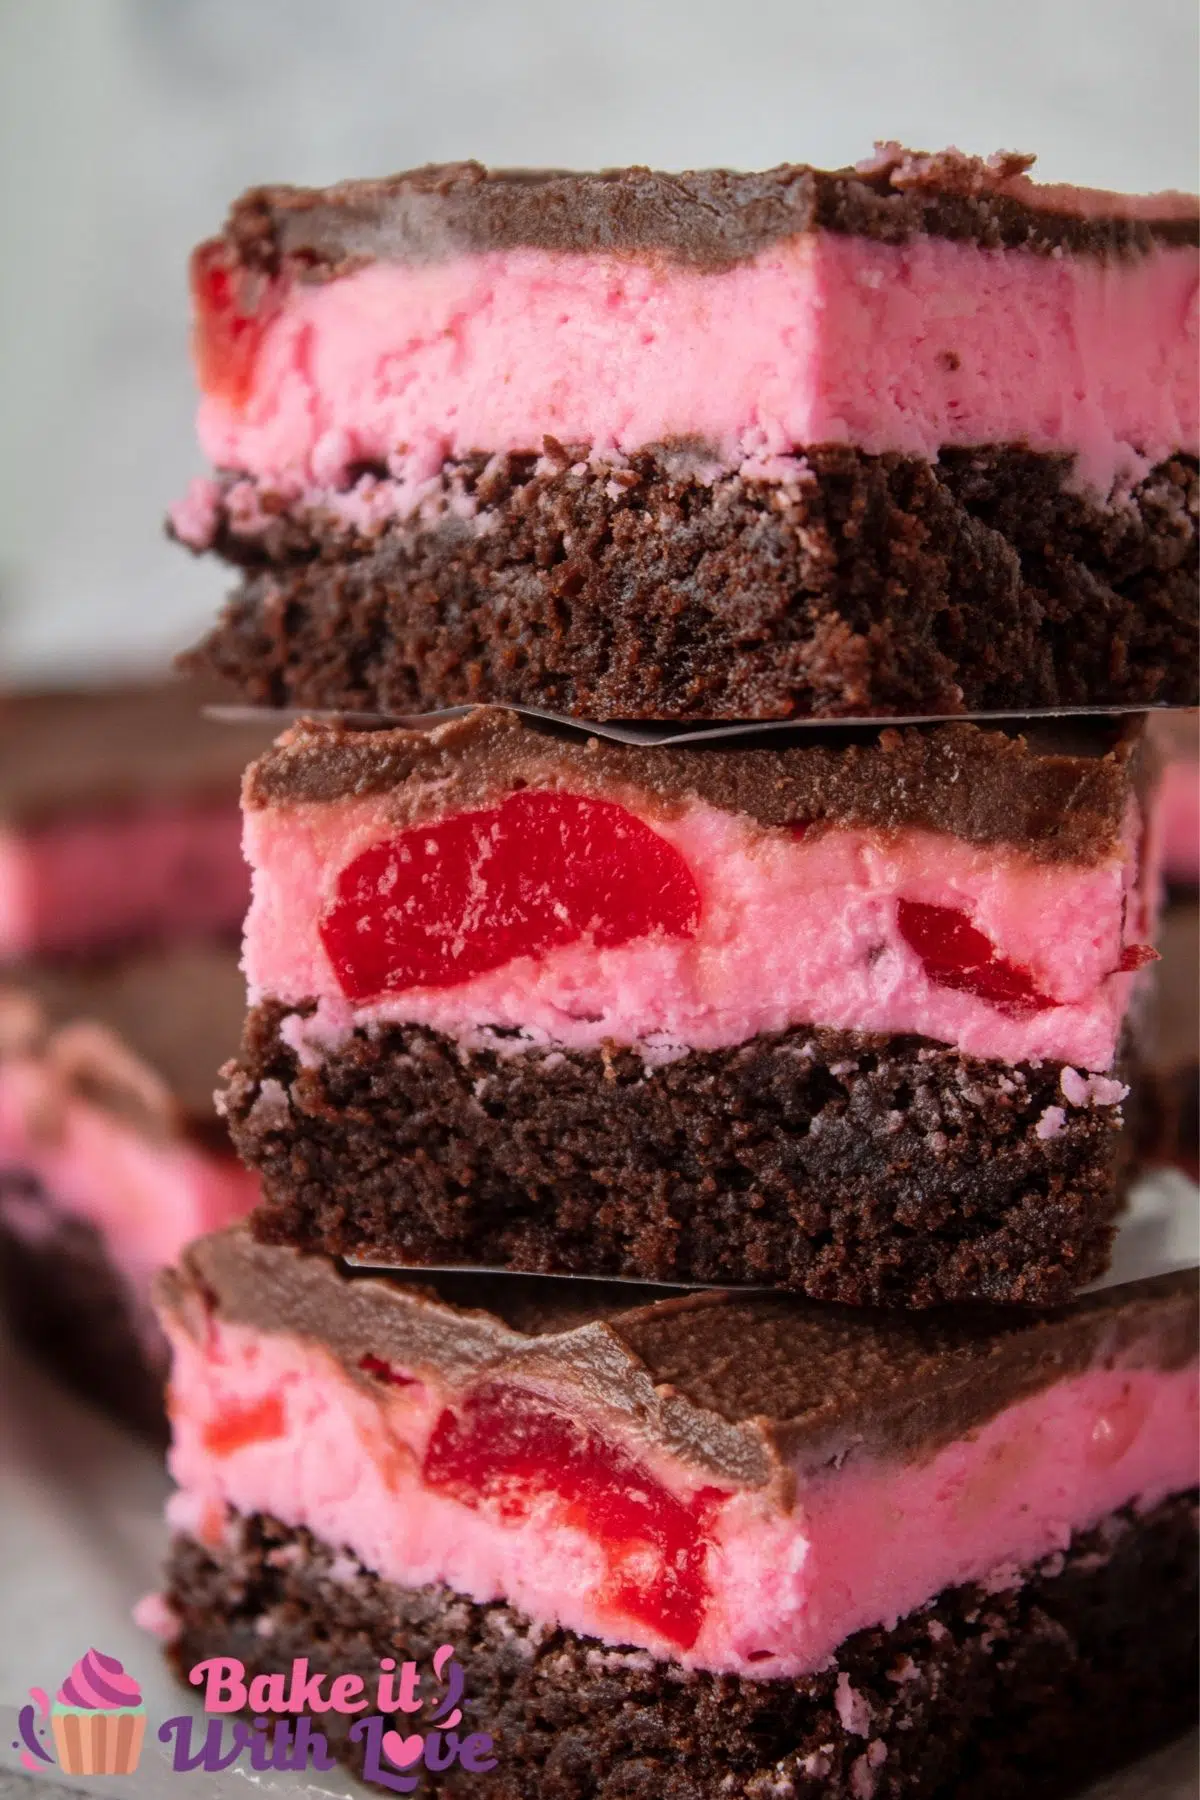 Image of maraschino cherry brownies stacked on top of each other.